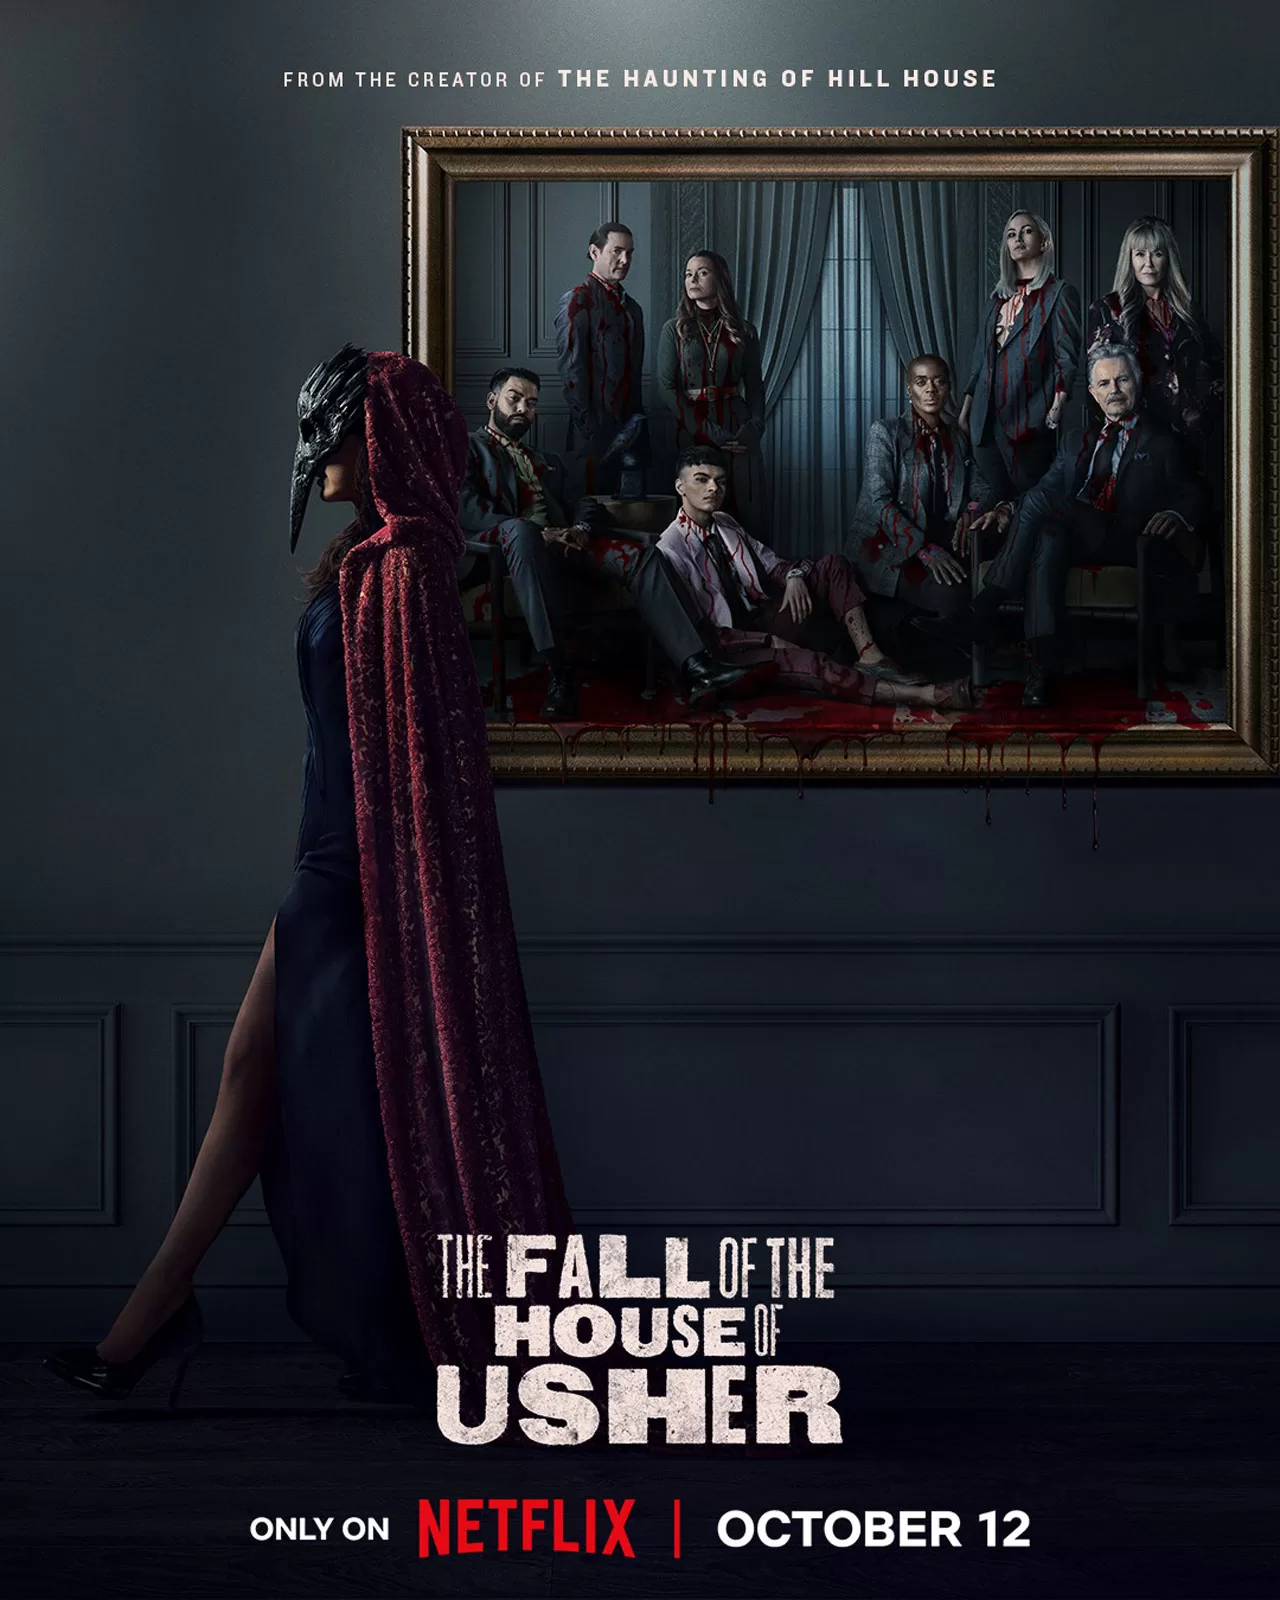 The Fall of the House of Usher #Usher